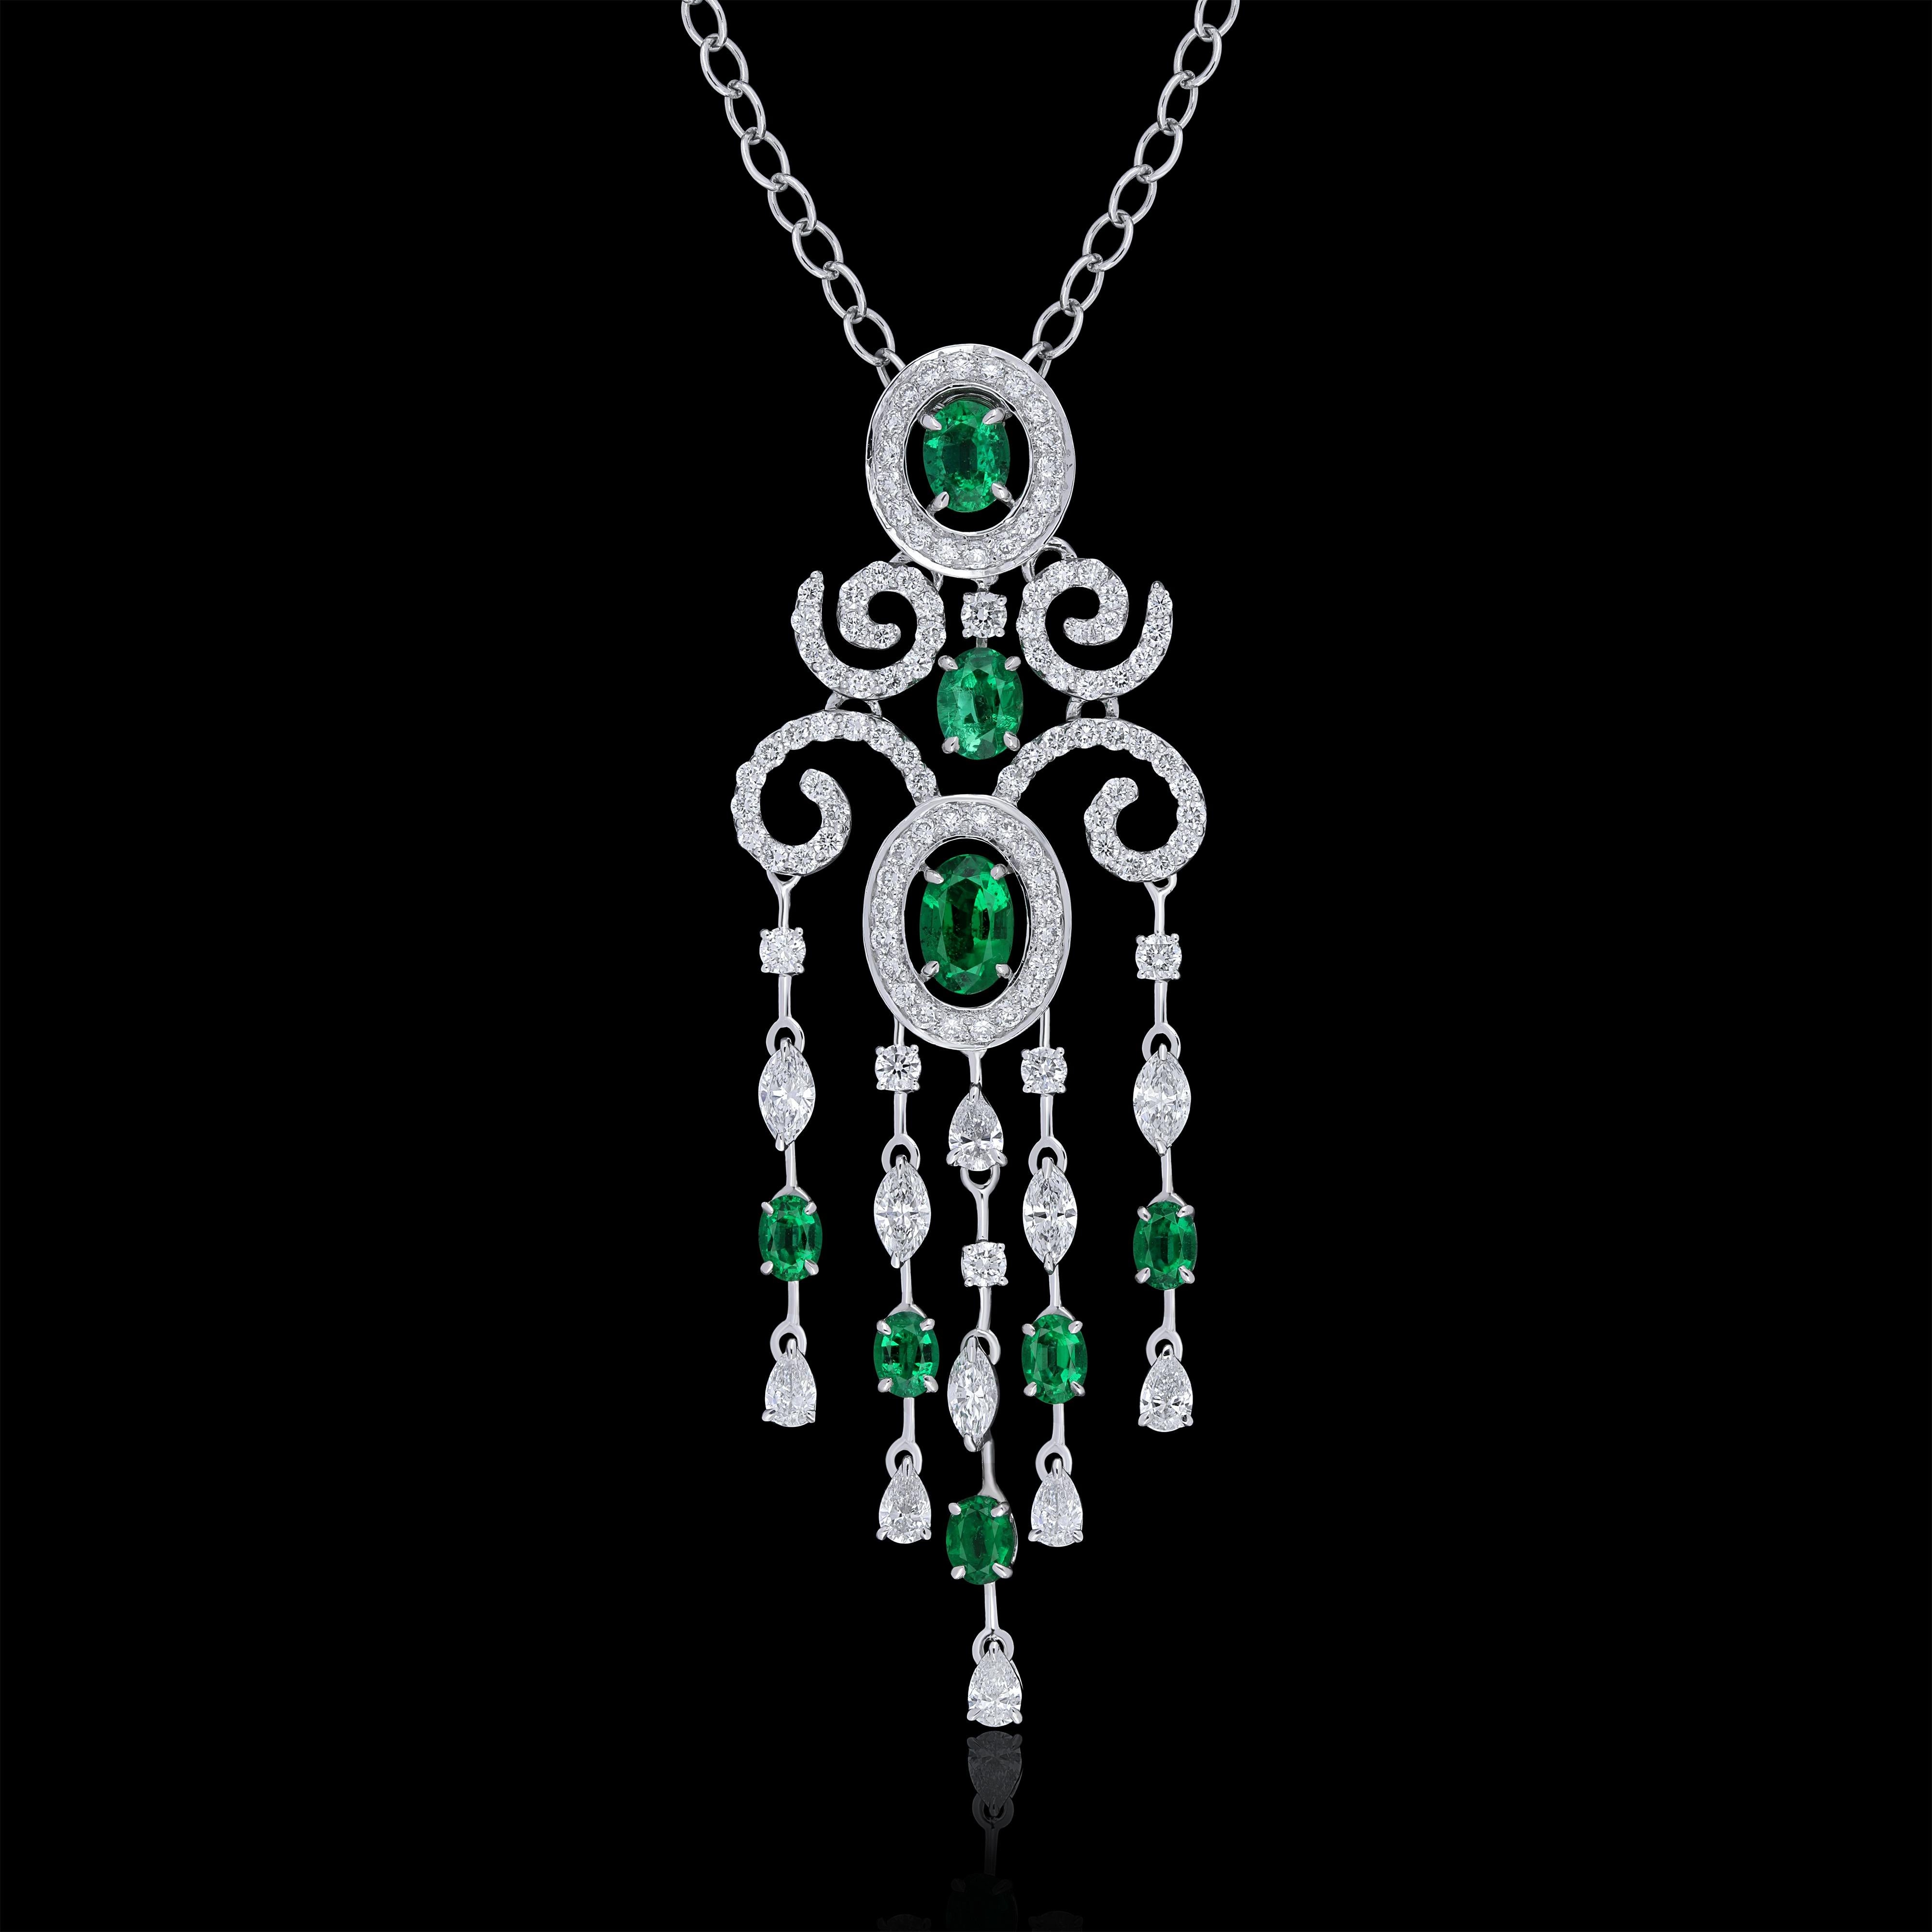 Elegant and exquisitely detailed 18 Karat White Gold Necklace, center set with 0.66Cts .Oval Shape Emerald and micro pave set Diamonds, weighing approx. 2.00Cts Beautifully Hand crafted in 18 Karat White Gold.

Stone Detail:
Emerald: 6x4MM, 5x4MM,